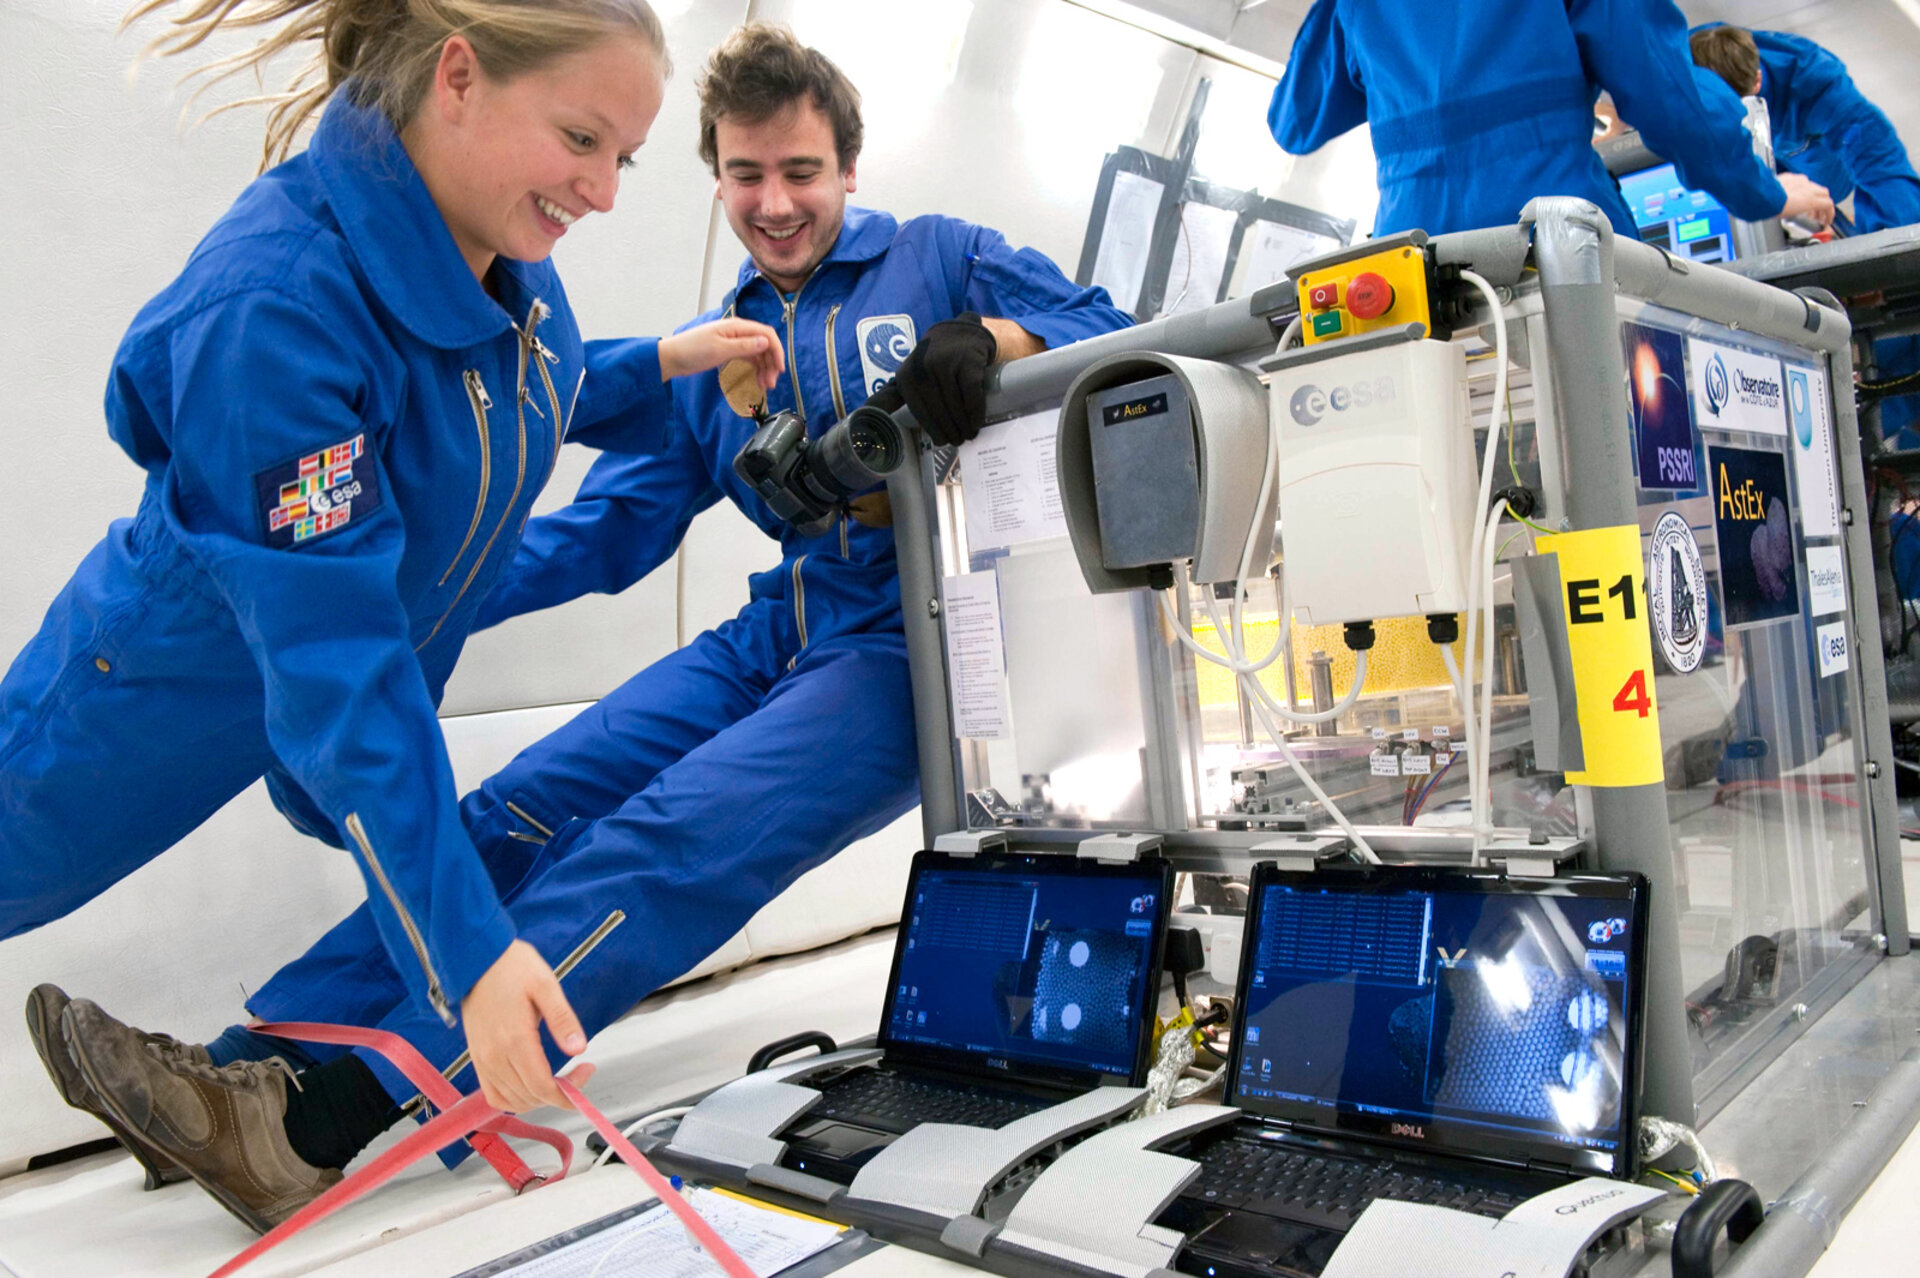 Students in microgravity